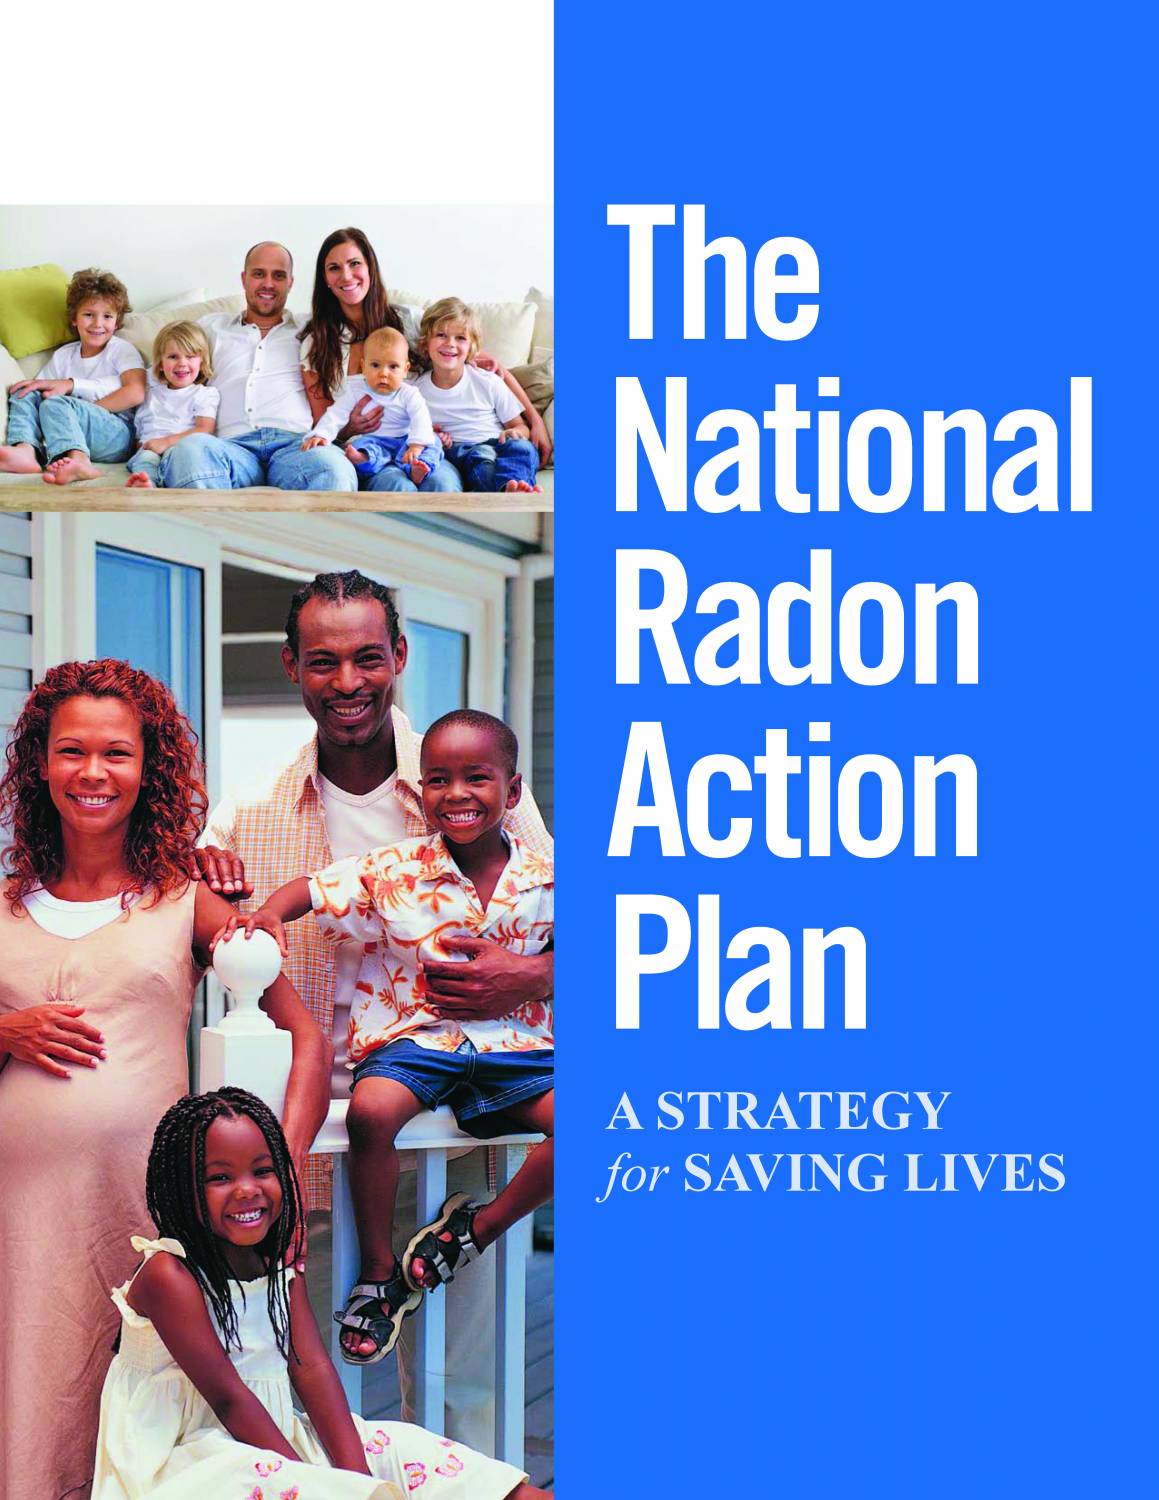 The National Radon Action Plan: A Strategy for Saving Lives